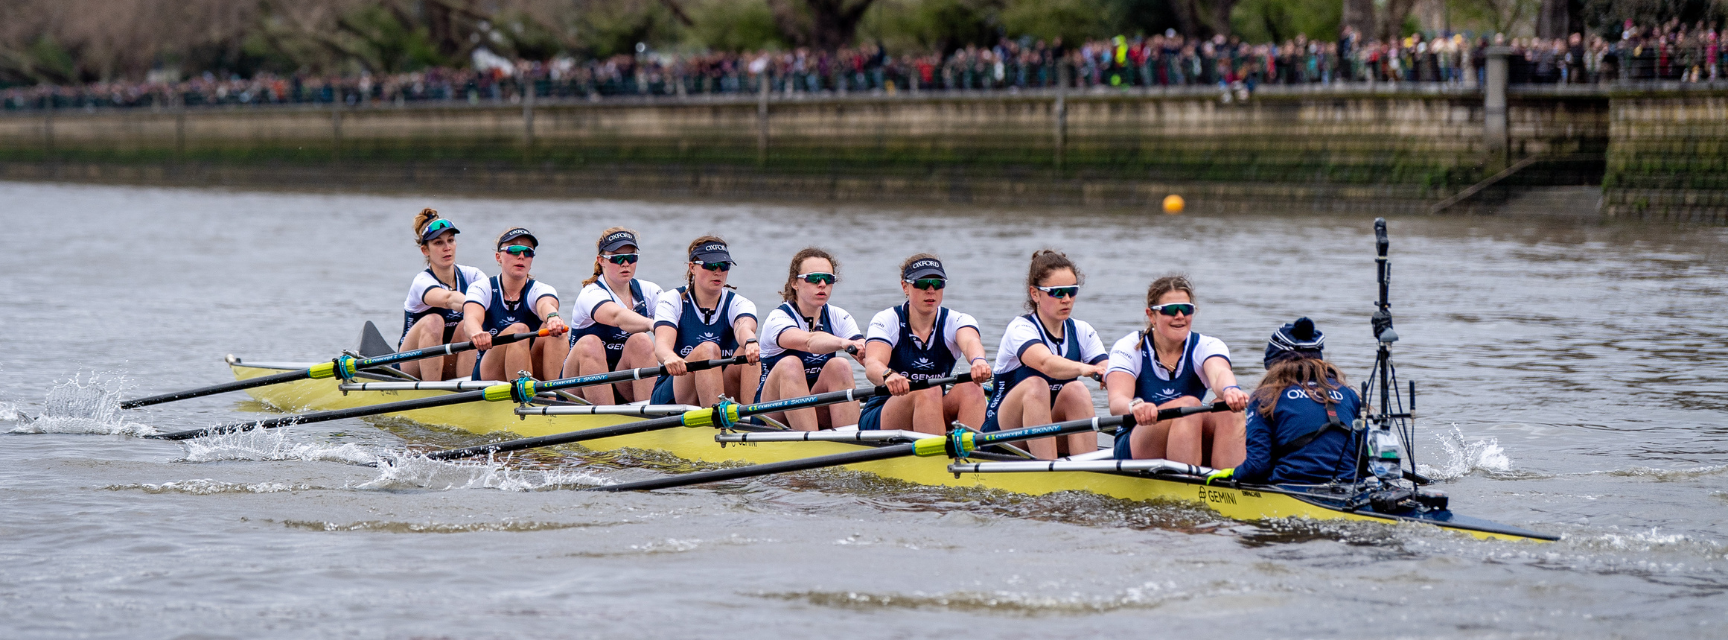 The women's blue boat racing down the Thames